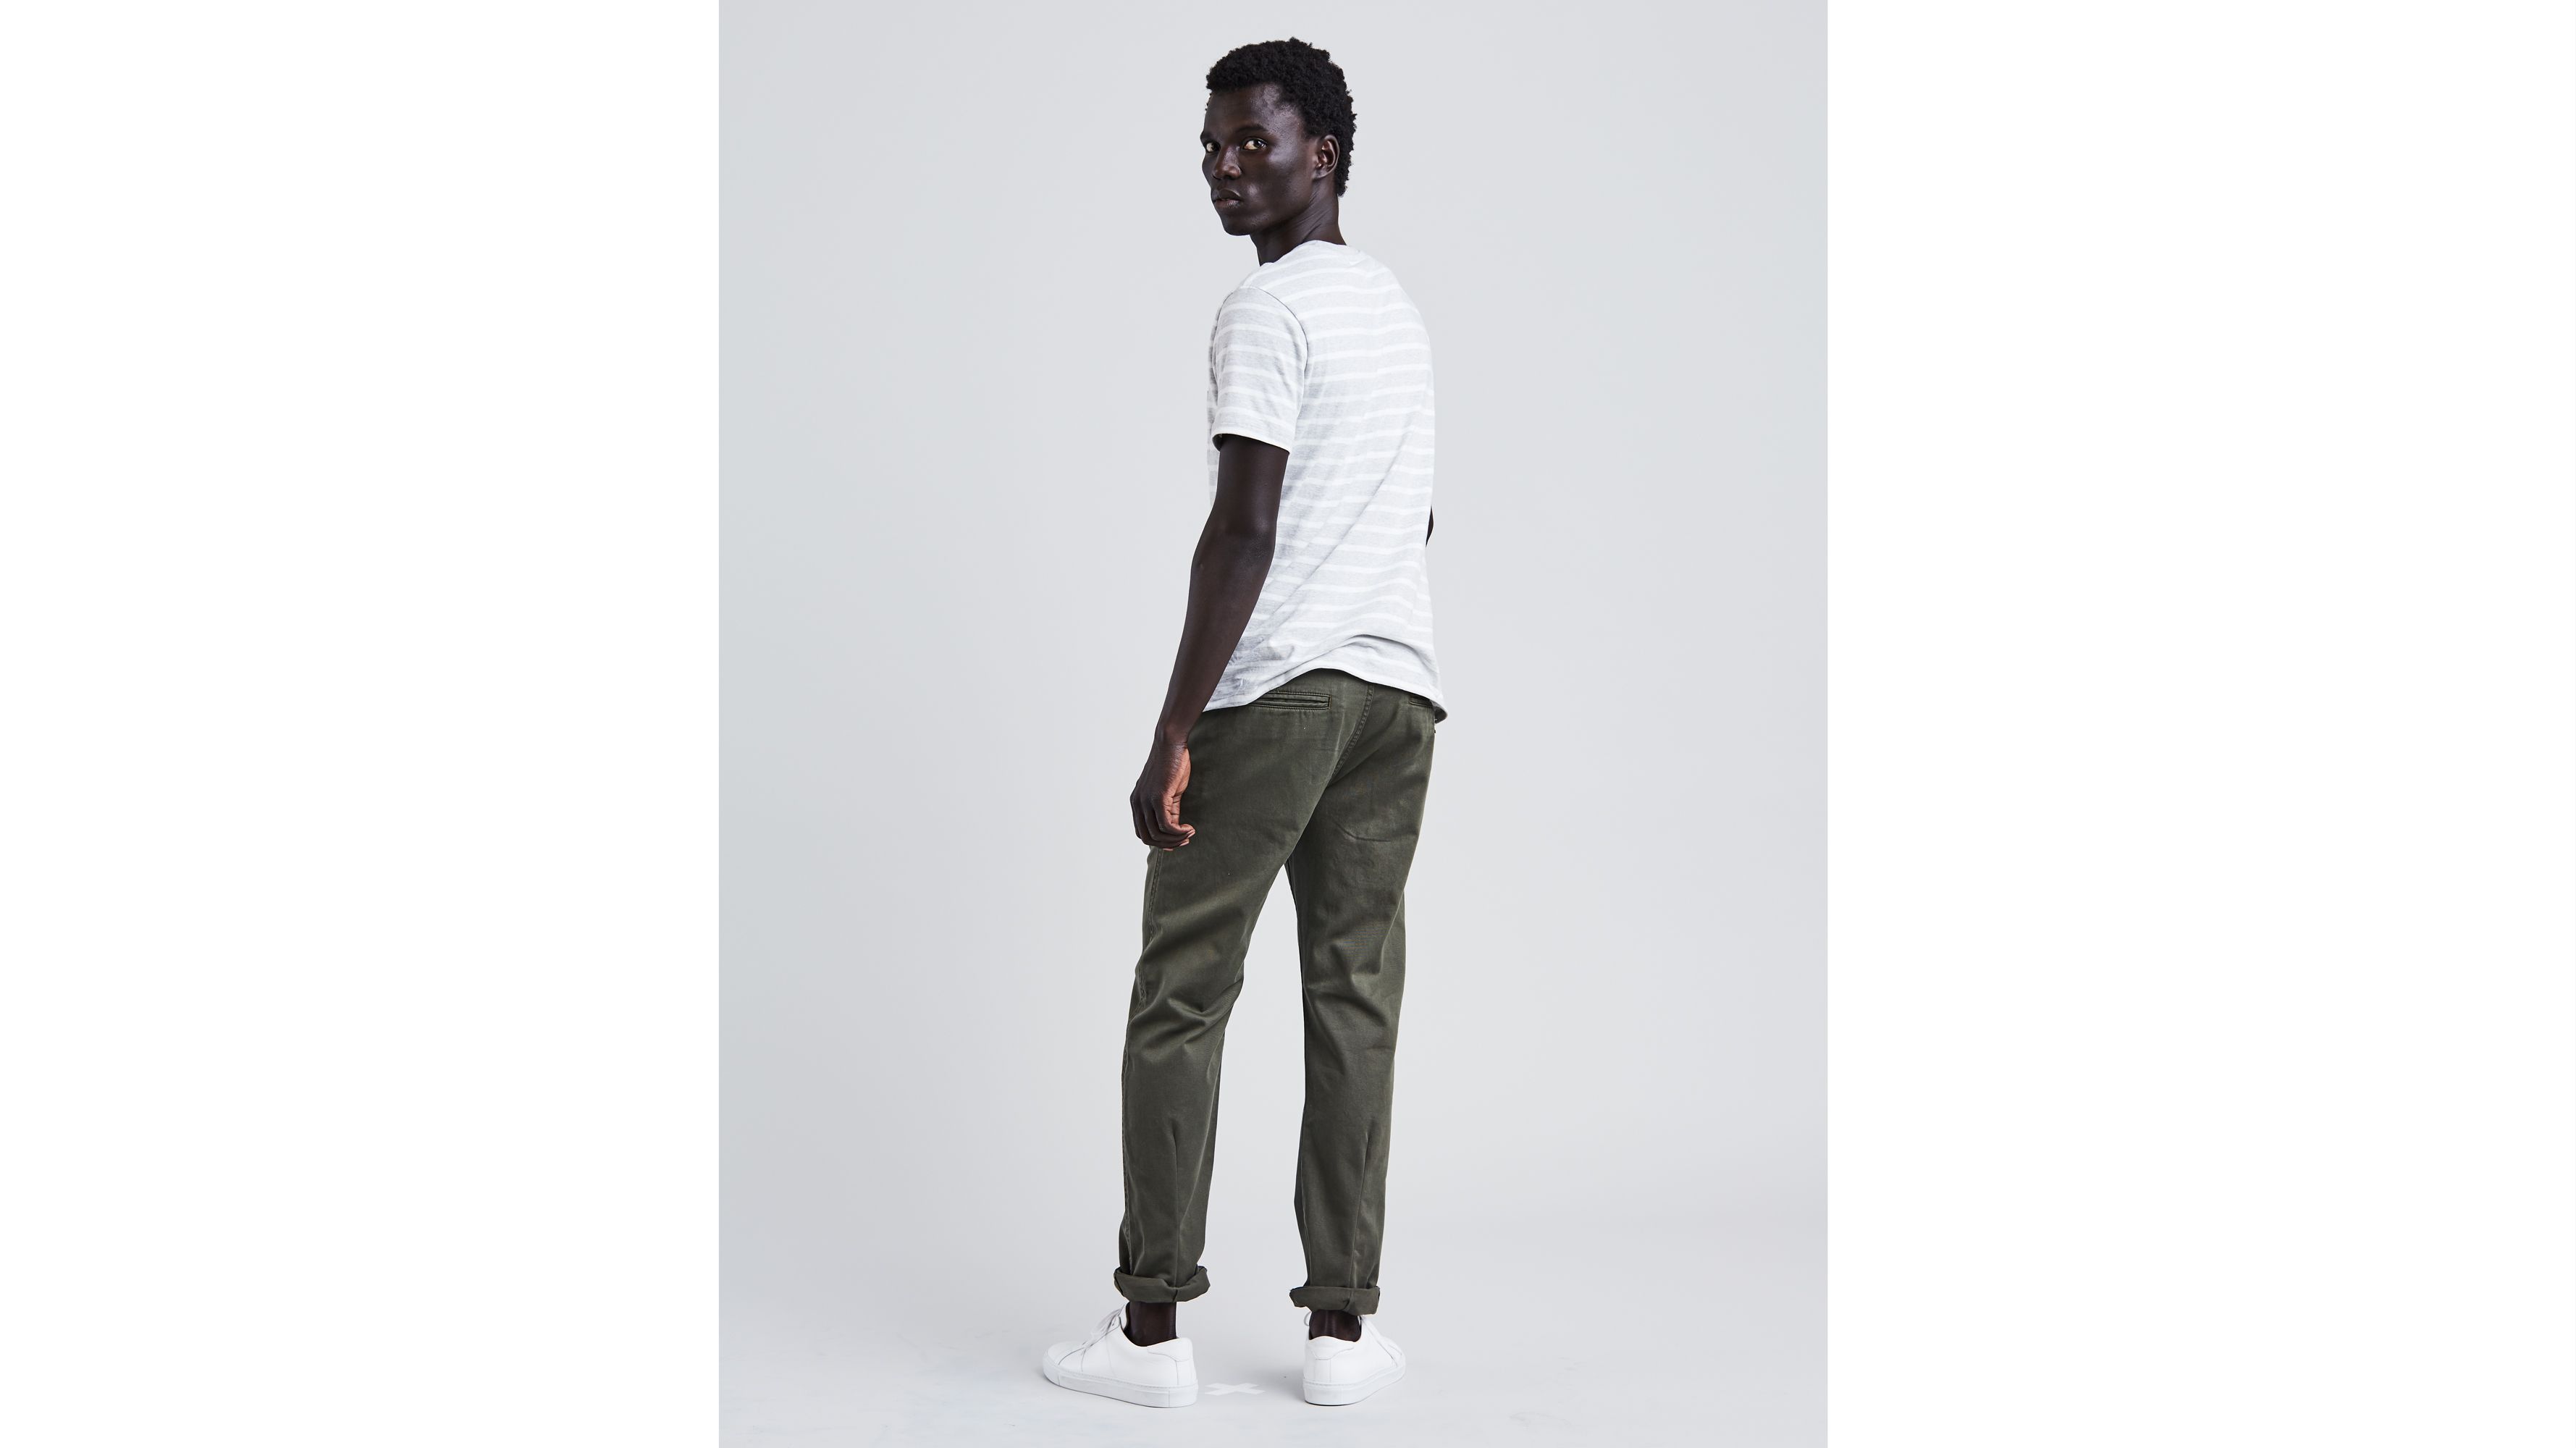 levi's tapered chinos